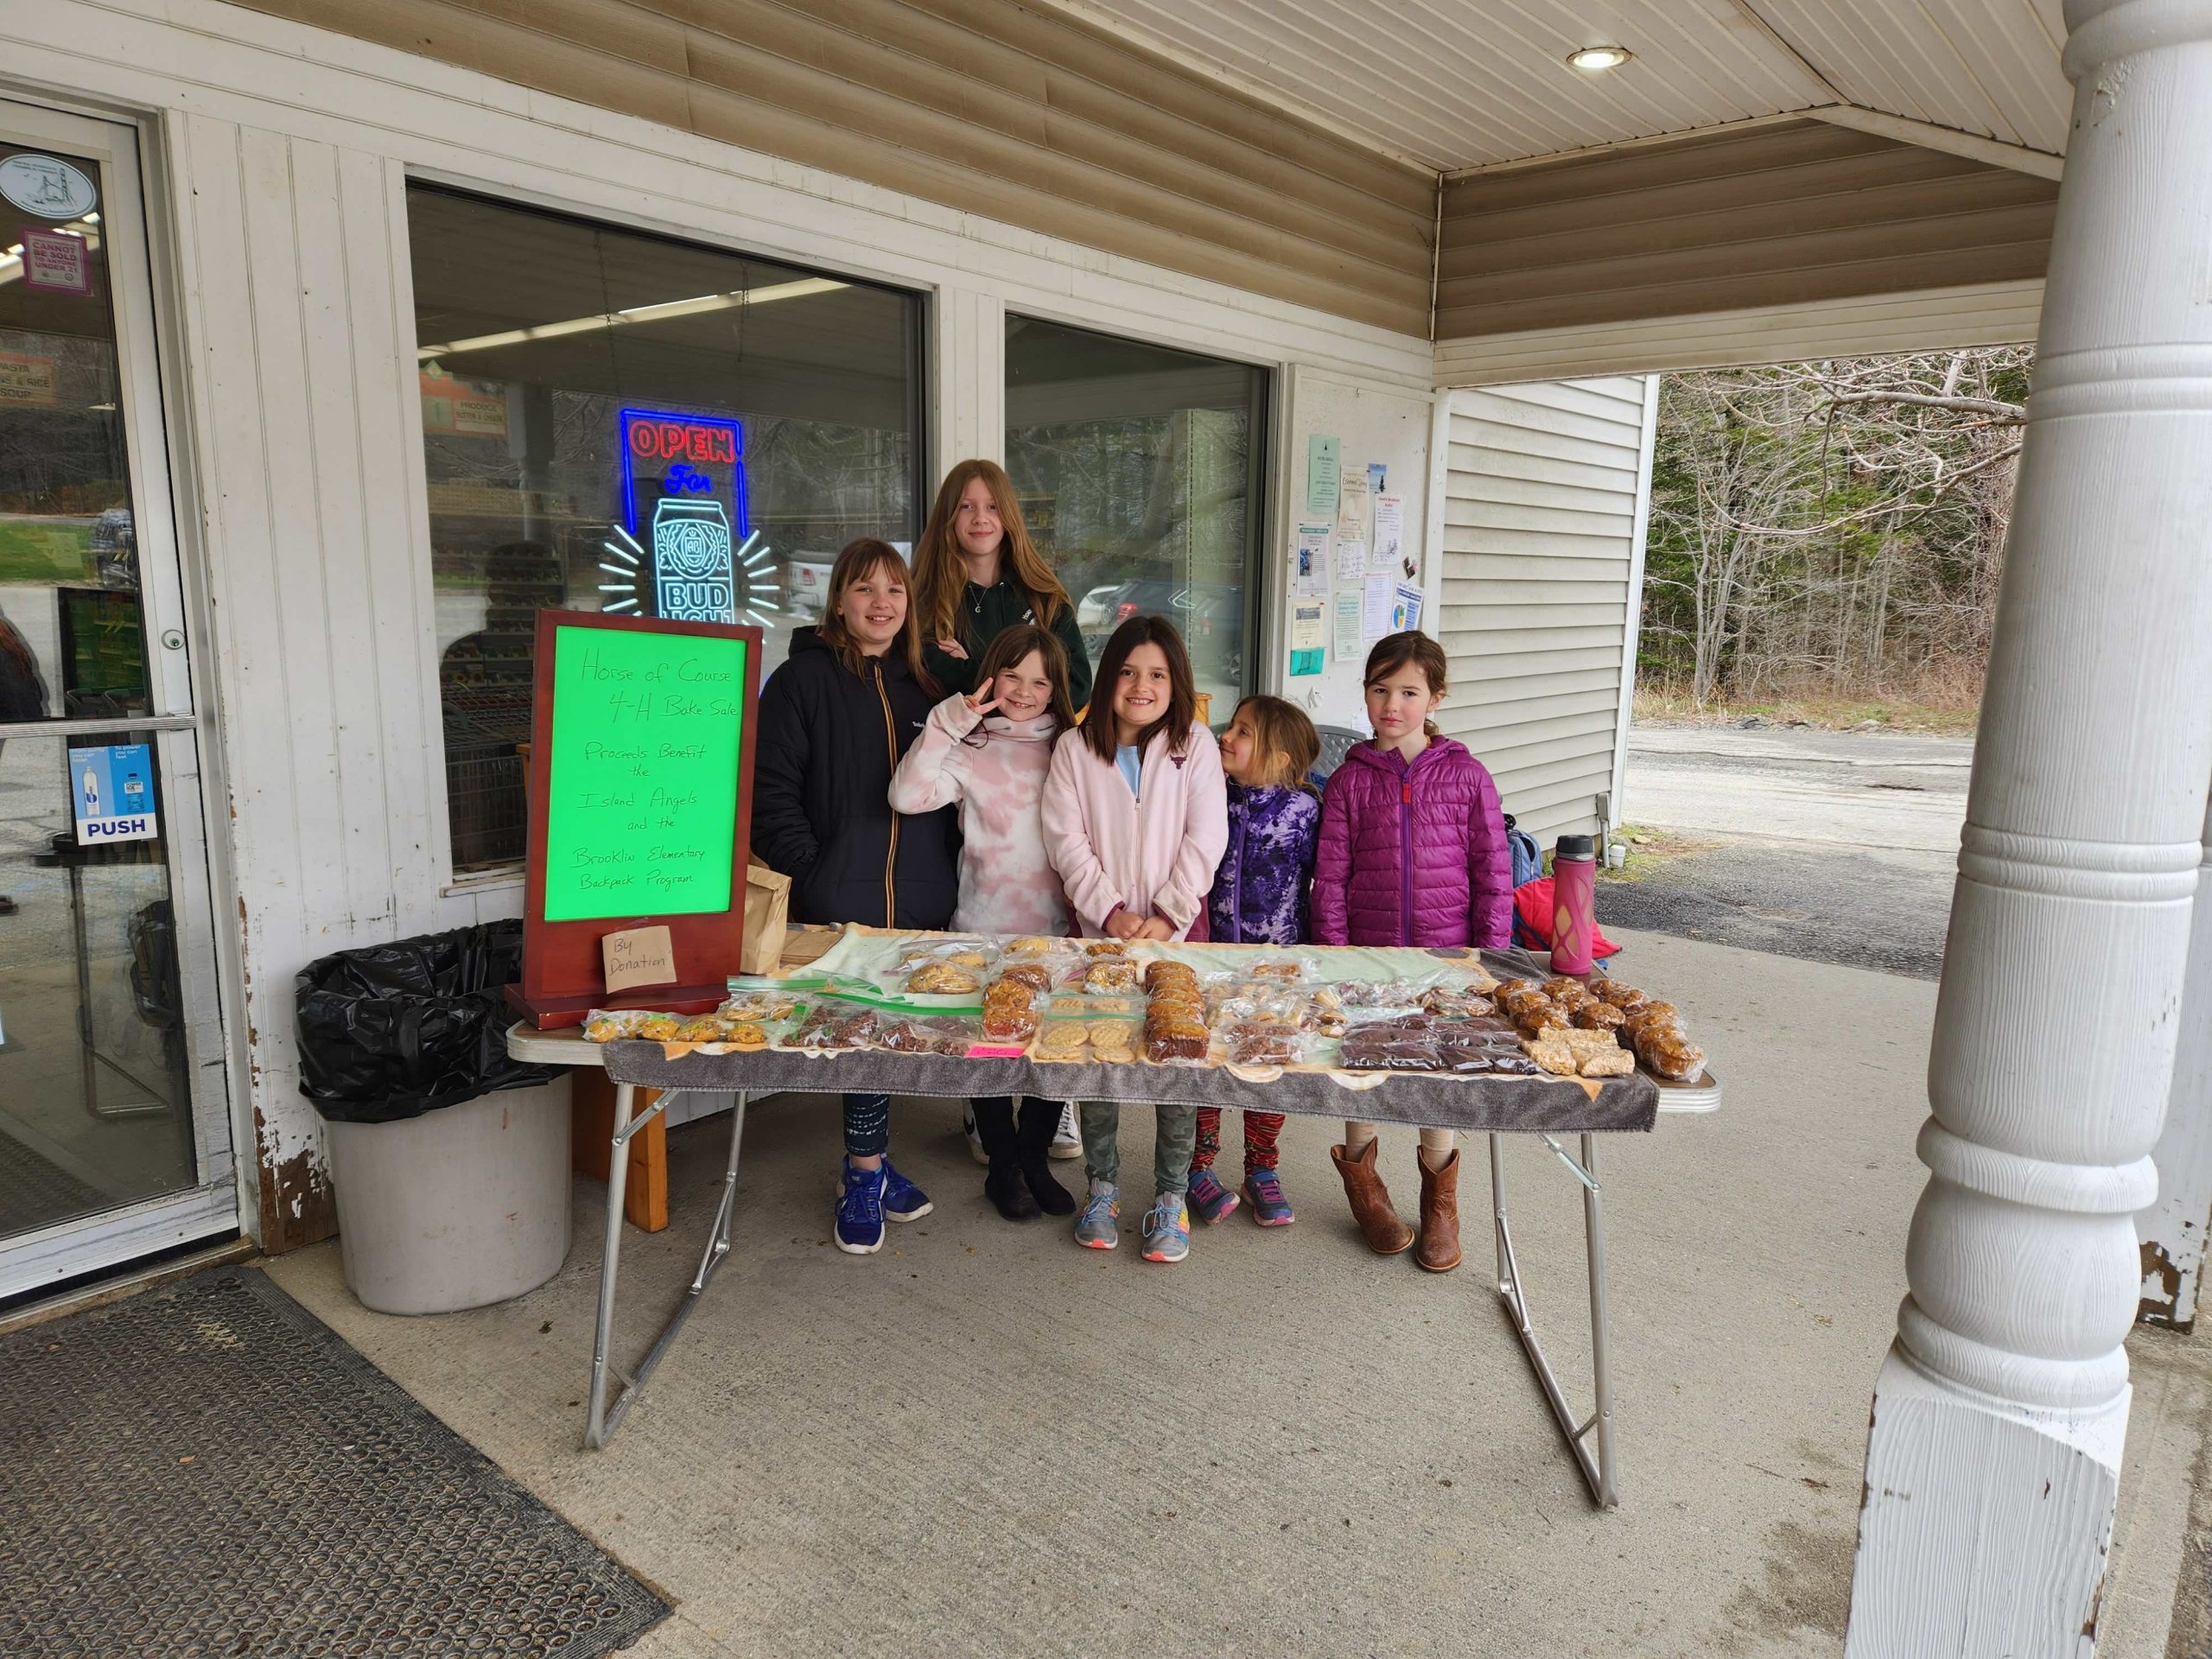 6 girls outside a convenience store with baked goods on a table in front of them.